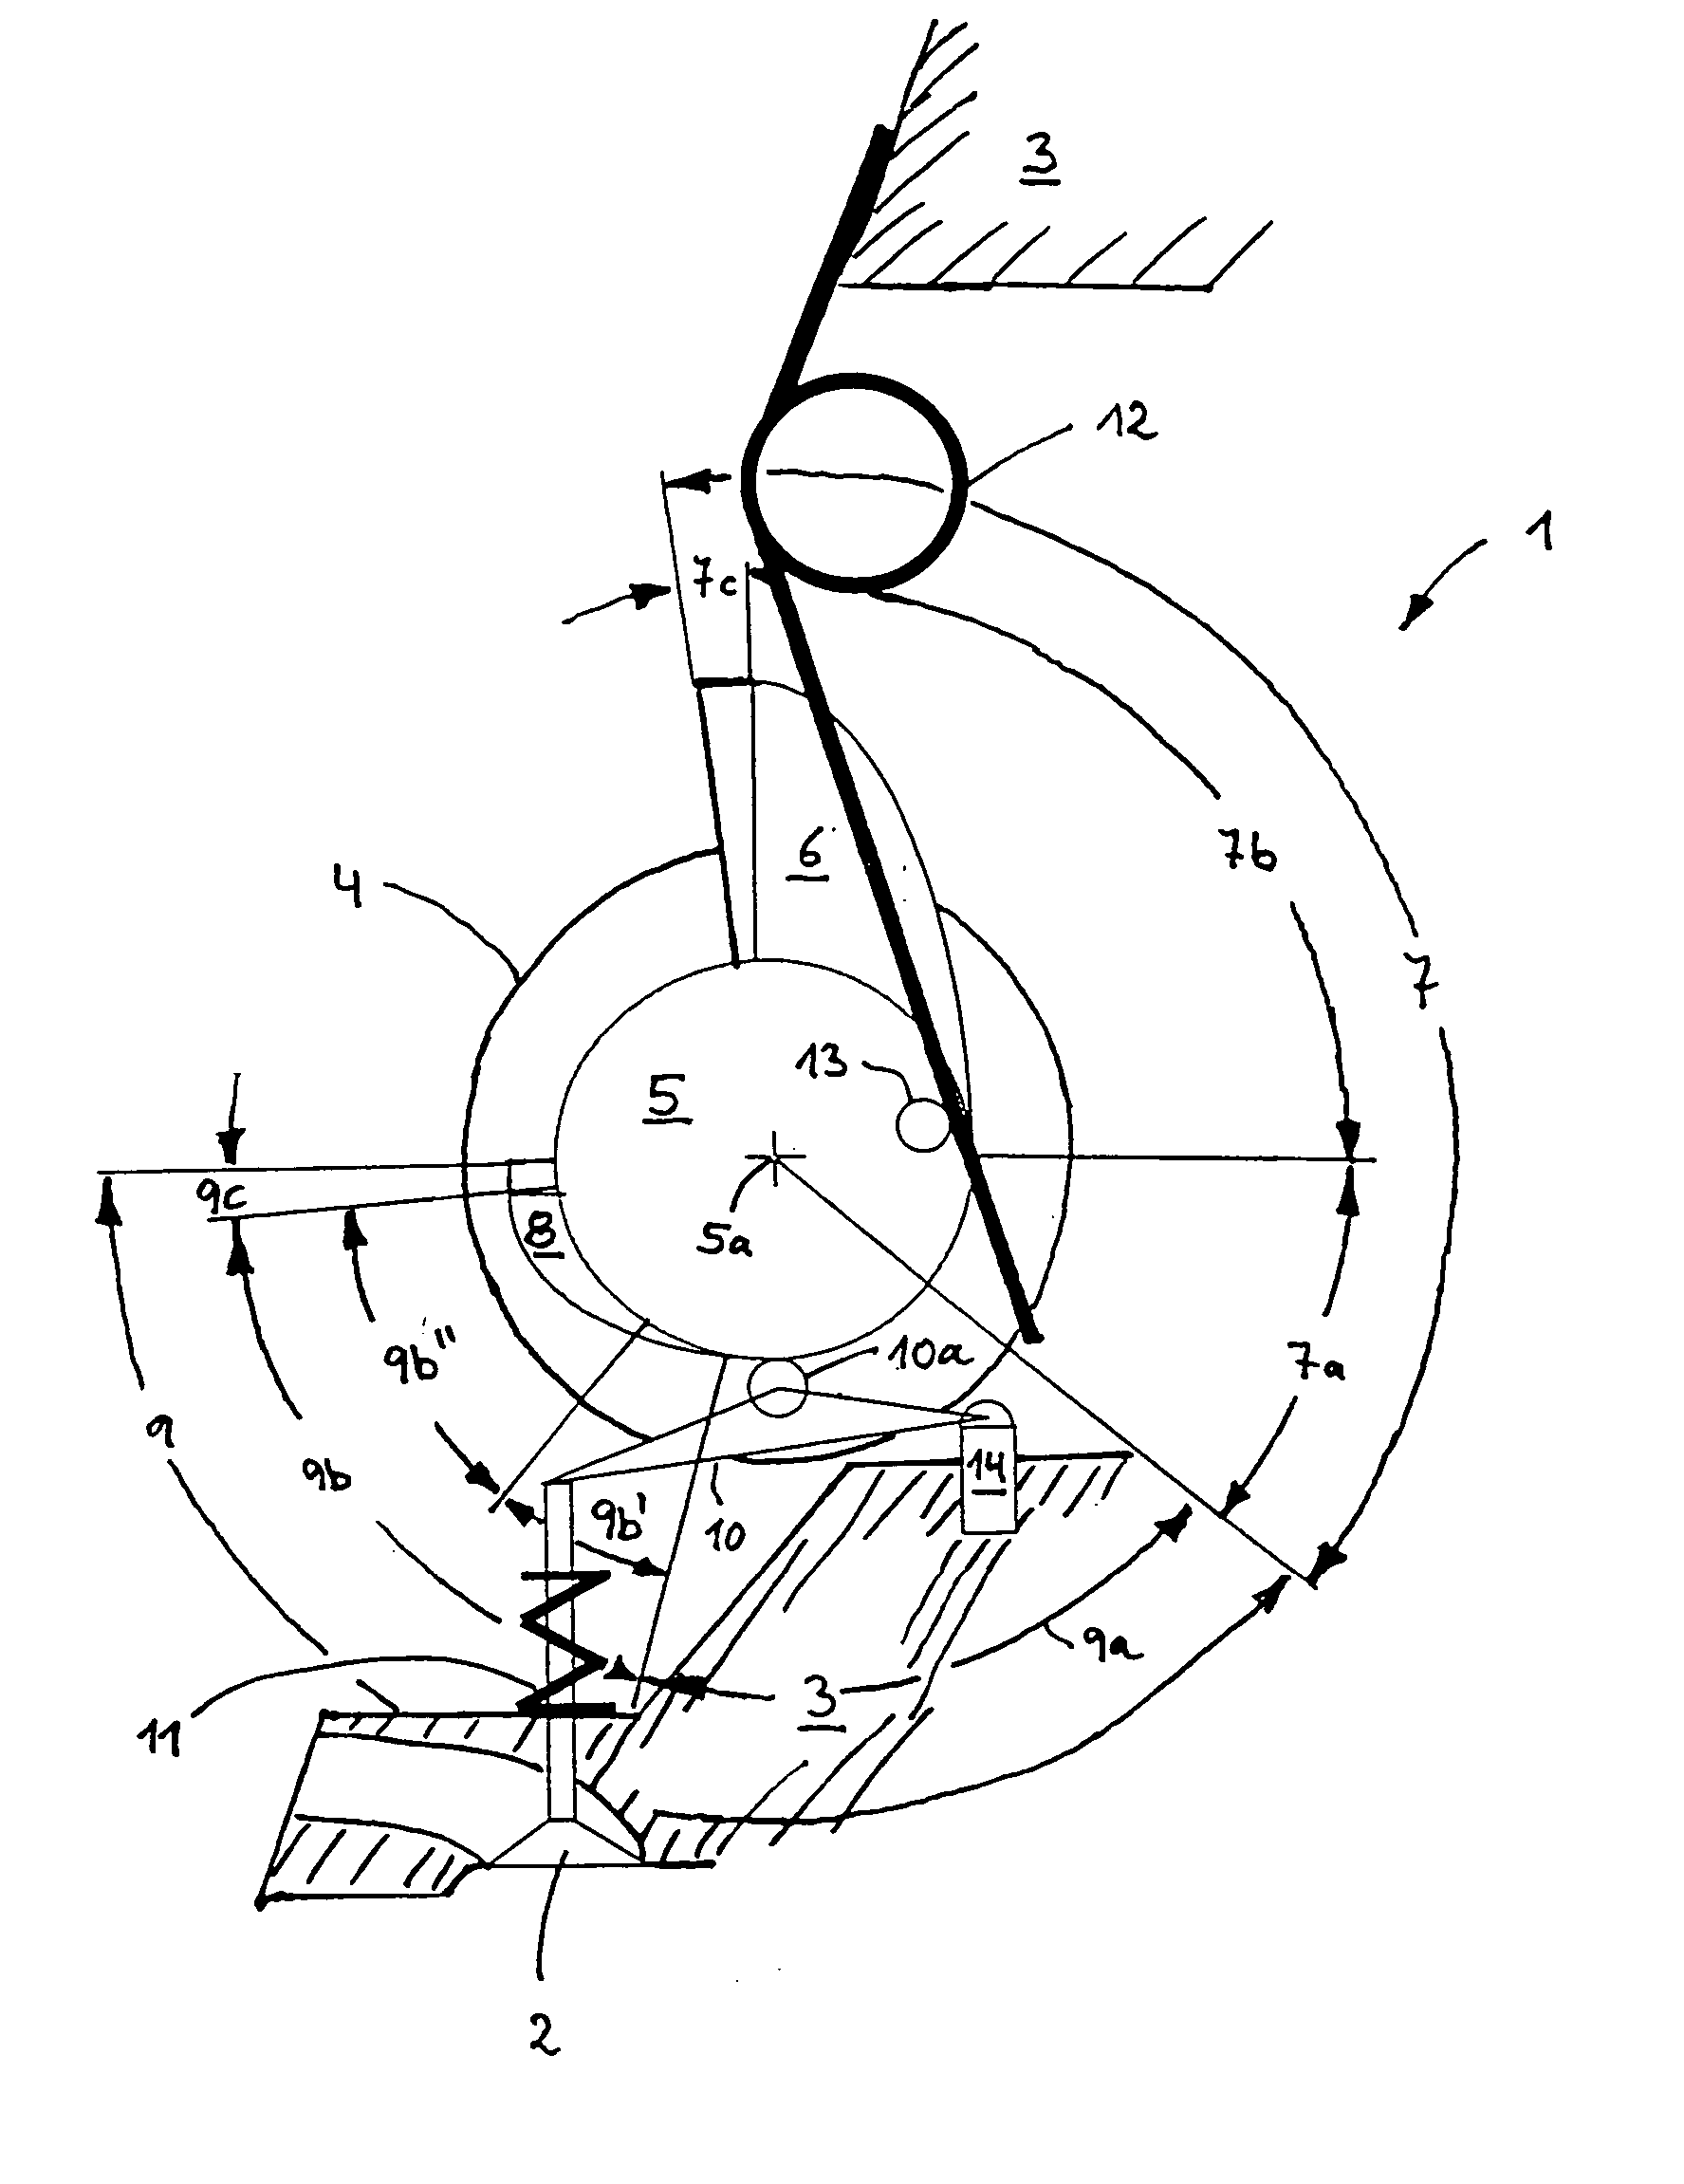 Pivoting actuator system for controlling the stroke of a gas exchange valve in the cylinder head of an internal combustion engine